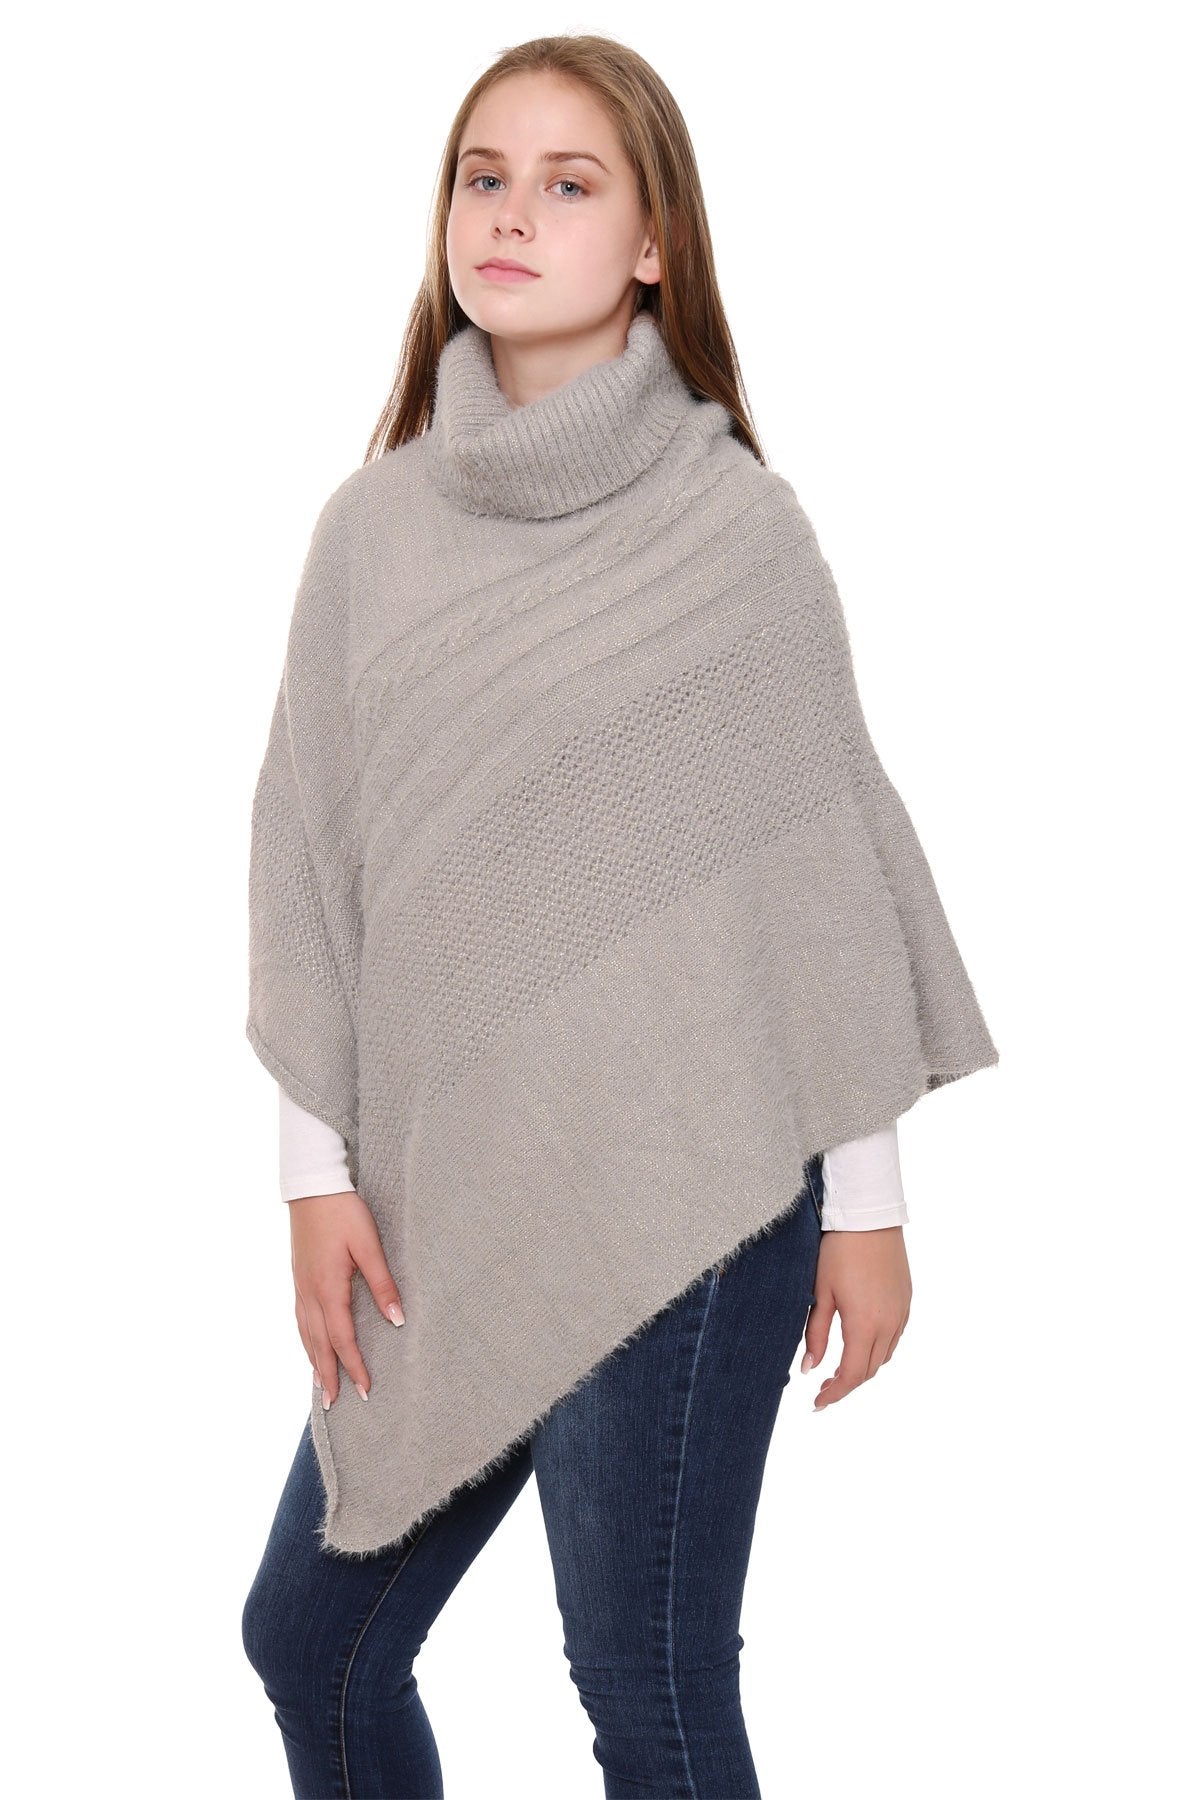 Solid Color W/ Lurex Knitted Turtleneck Poncho